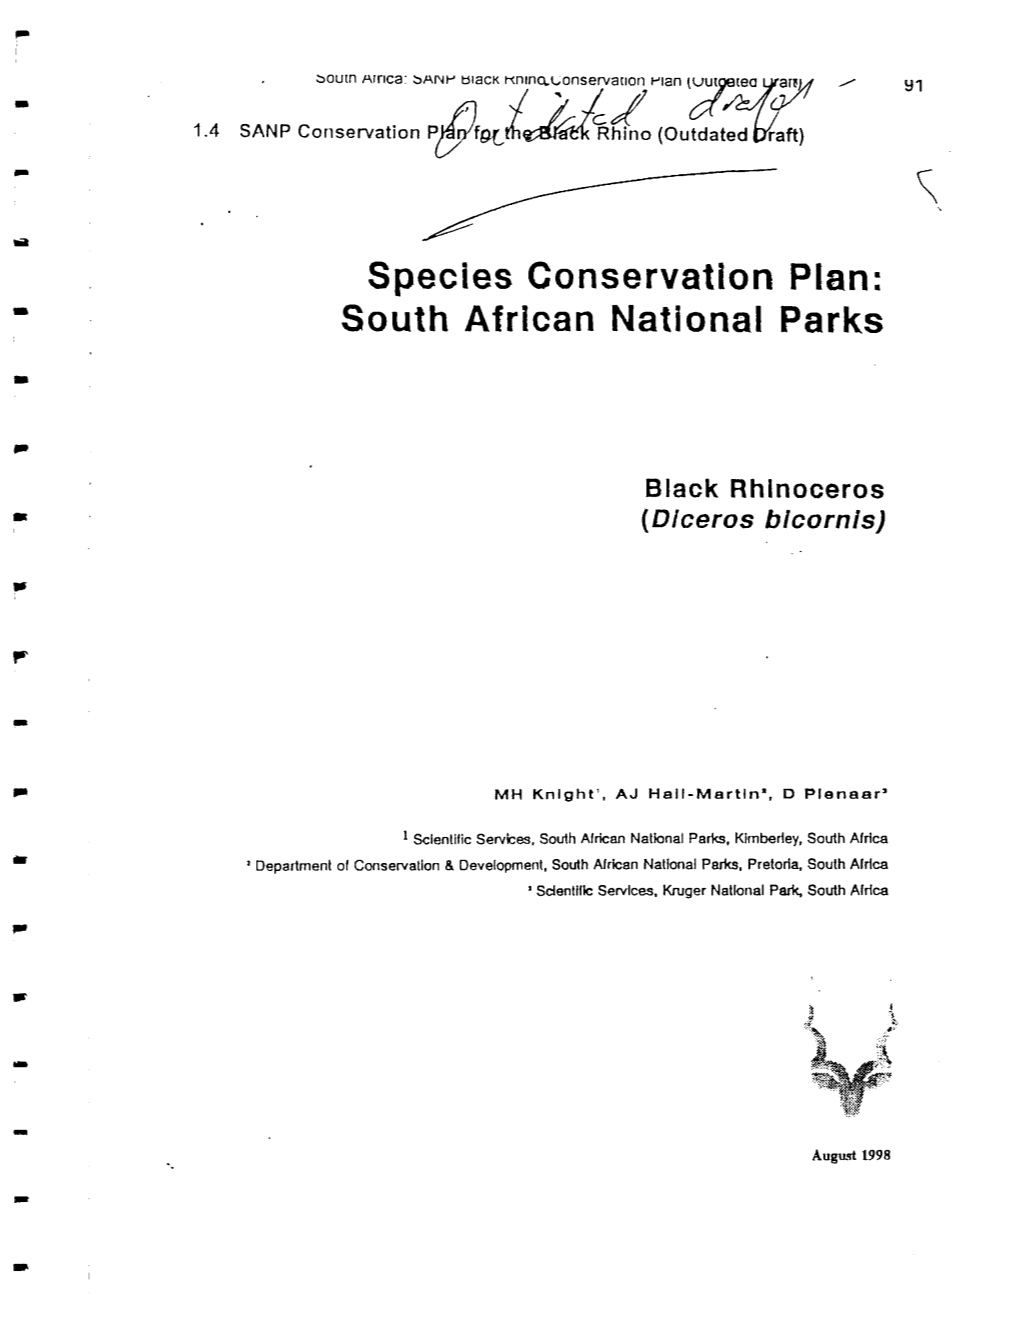 Species Conservation Plan: South African National Parks